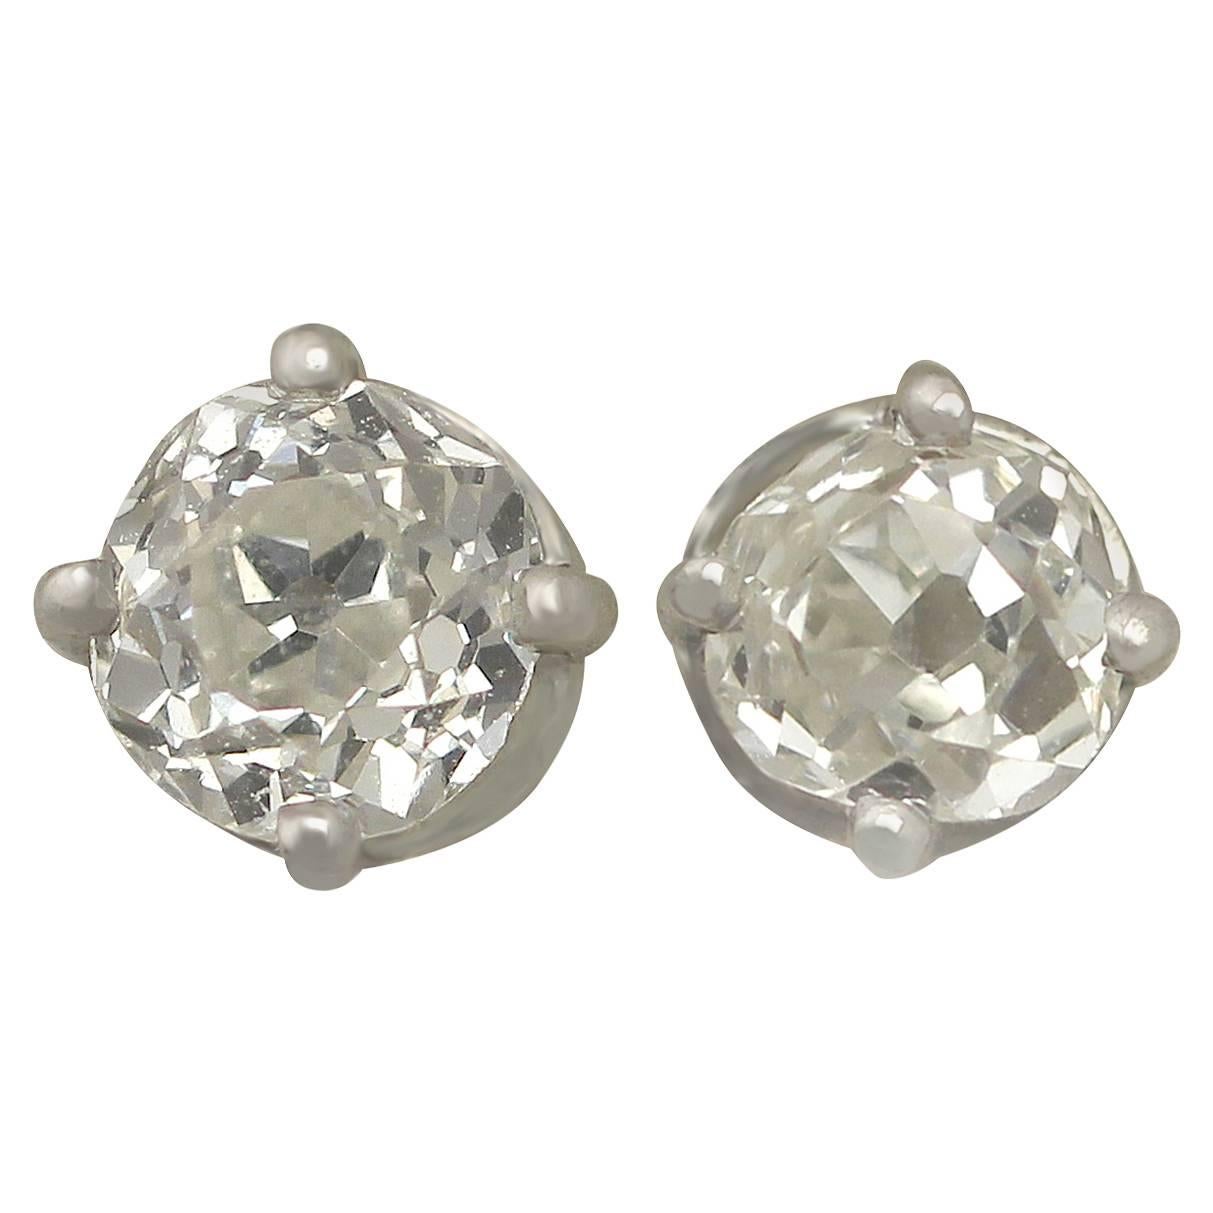 1890s and Contemporary 0.65 Carat Diamond and Platinum Stud Earrings